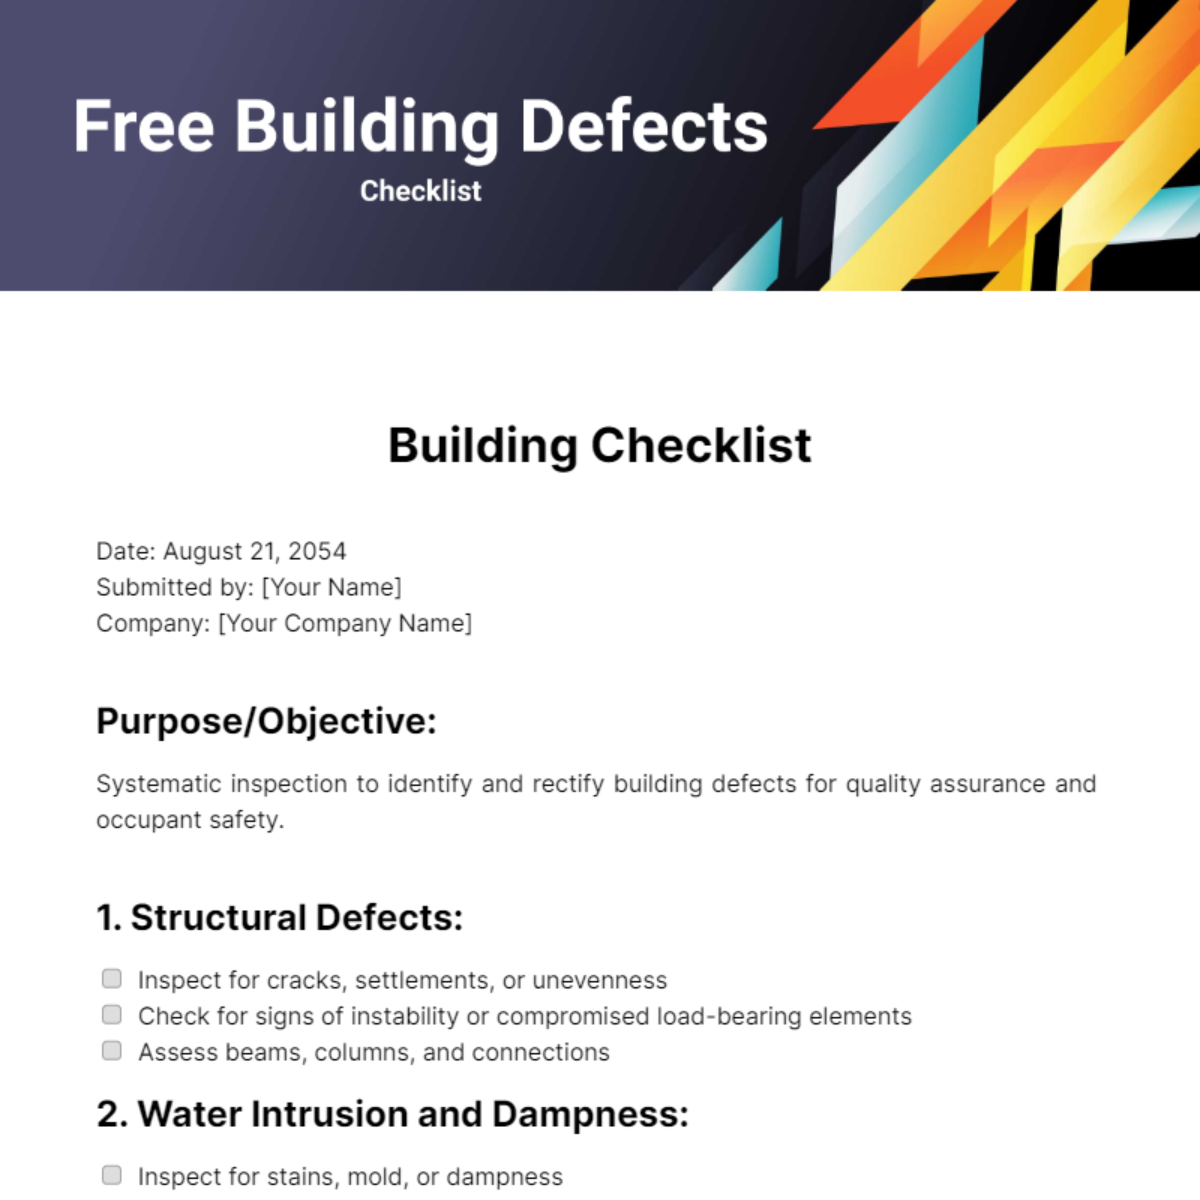 Free Building Defects Checklist Template